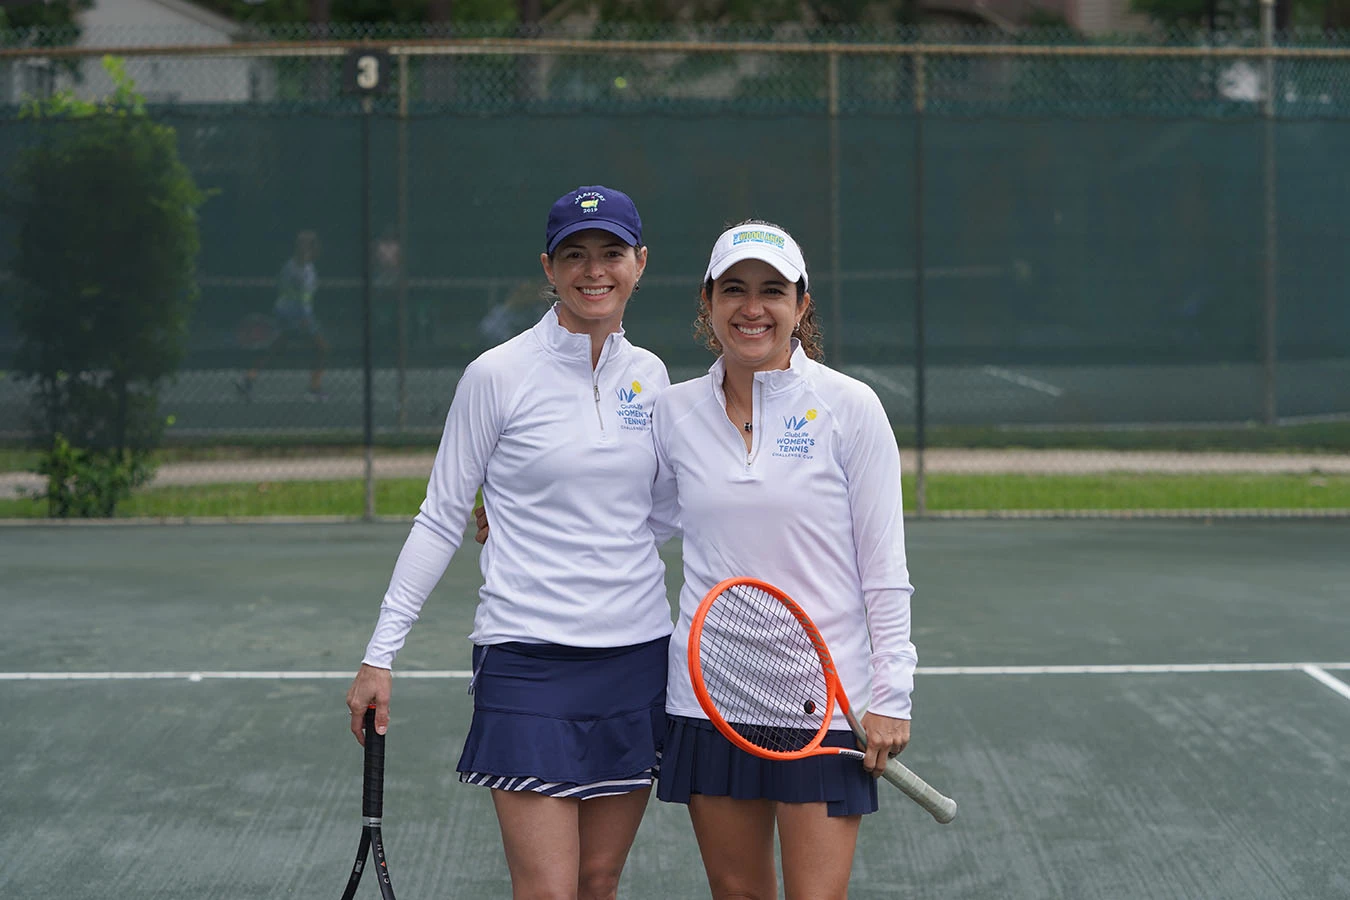 women posing for a photo on a tennis court